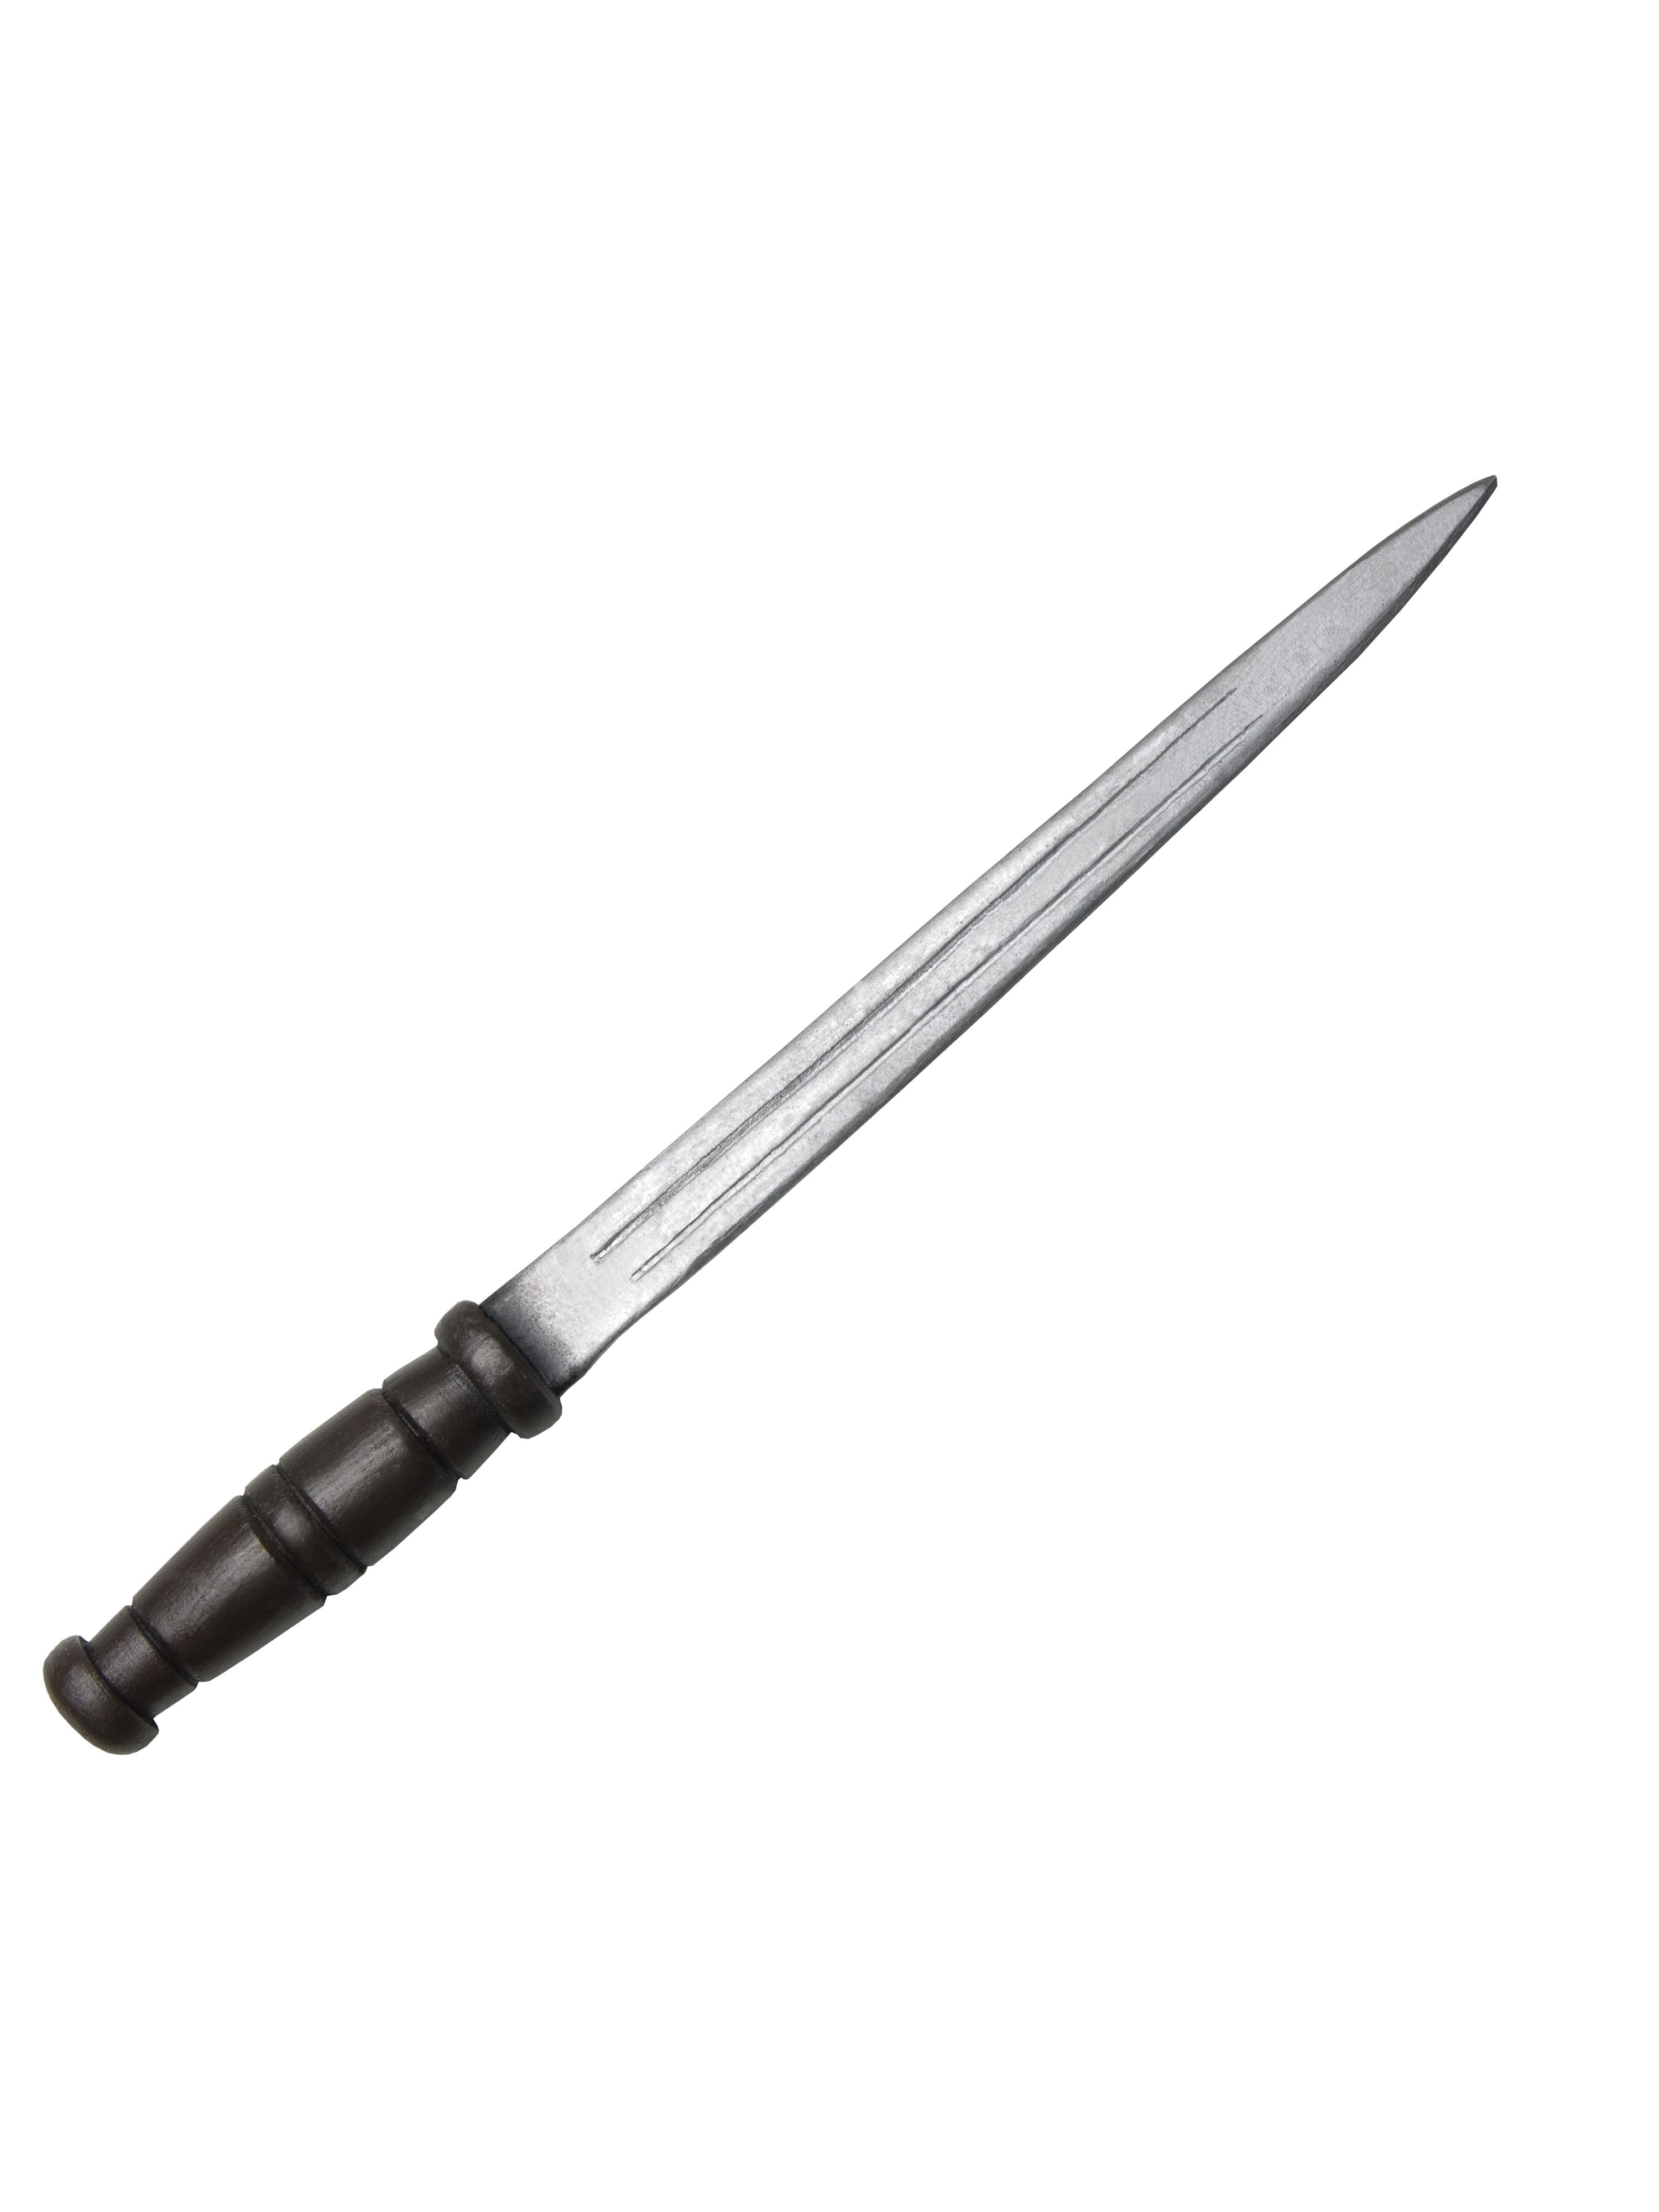 Adult Snow White and the Huntsman Snow Whites Dagger - costumes.com